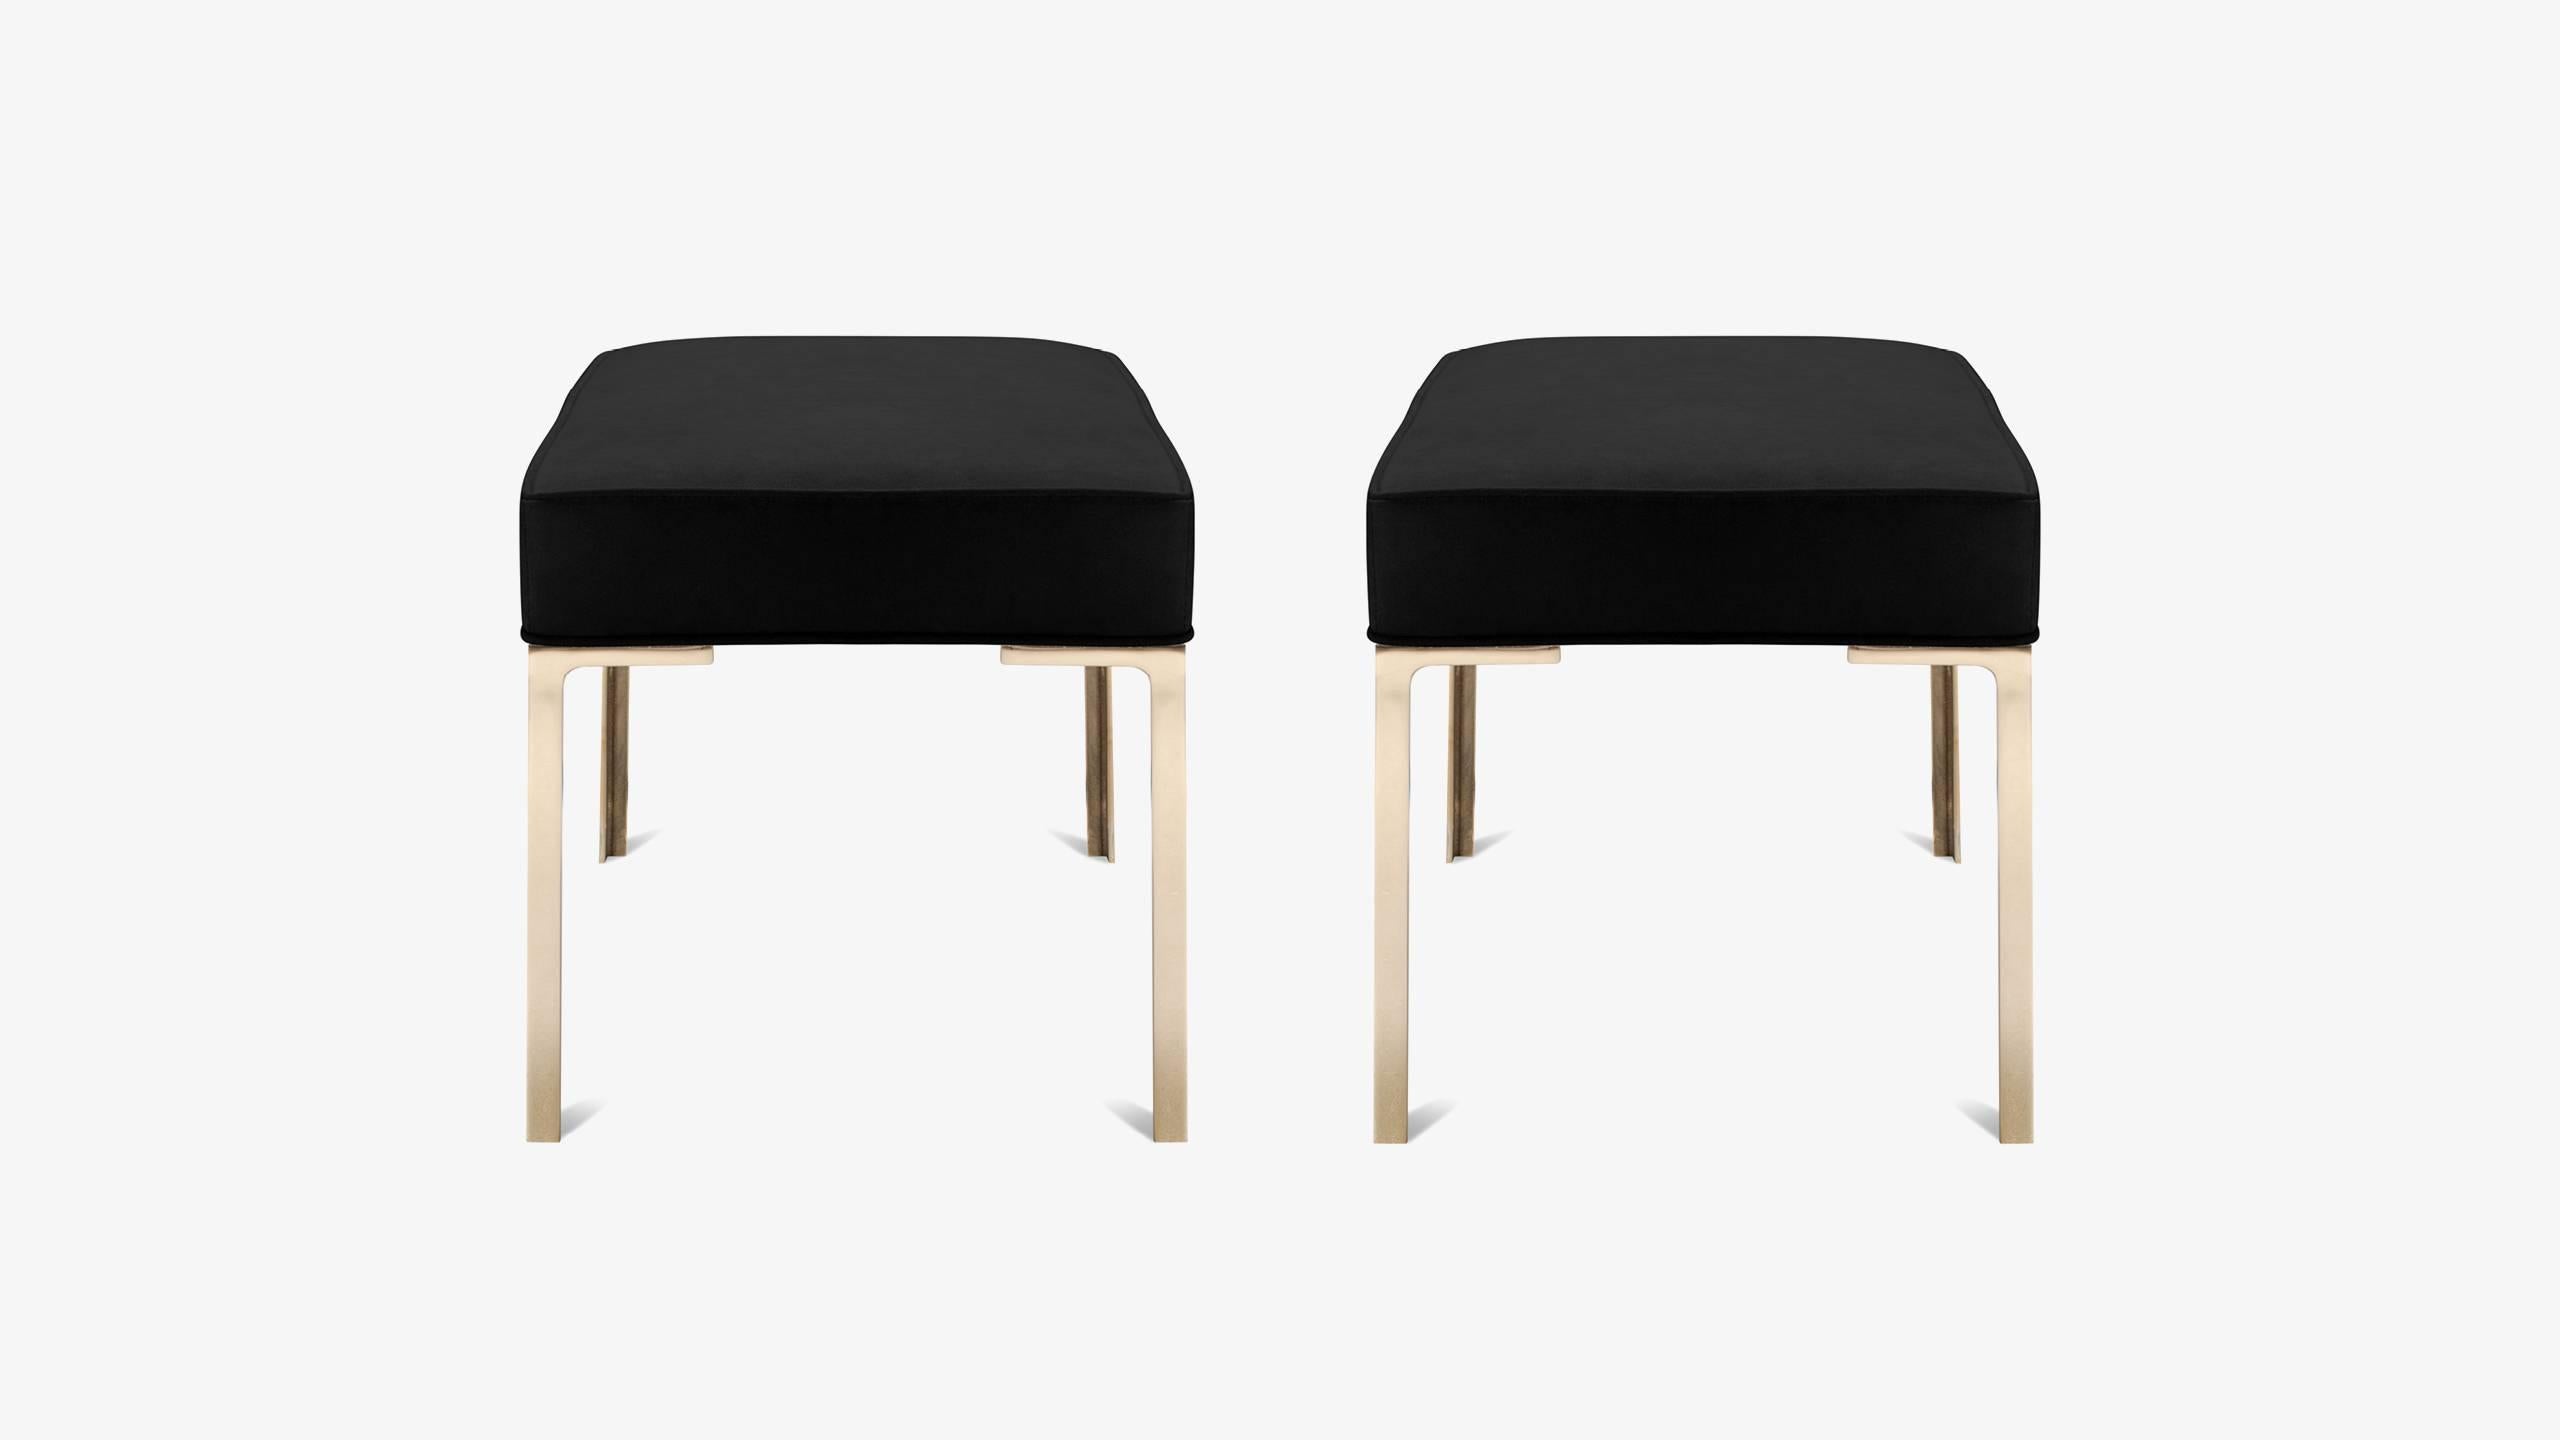 Mid-Century Modern Astor Brass Ottomans in Noir Luxe-Suede by Montage, Pair For Sale